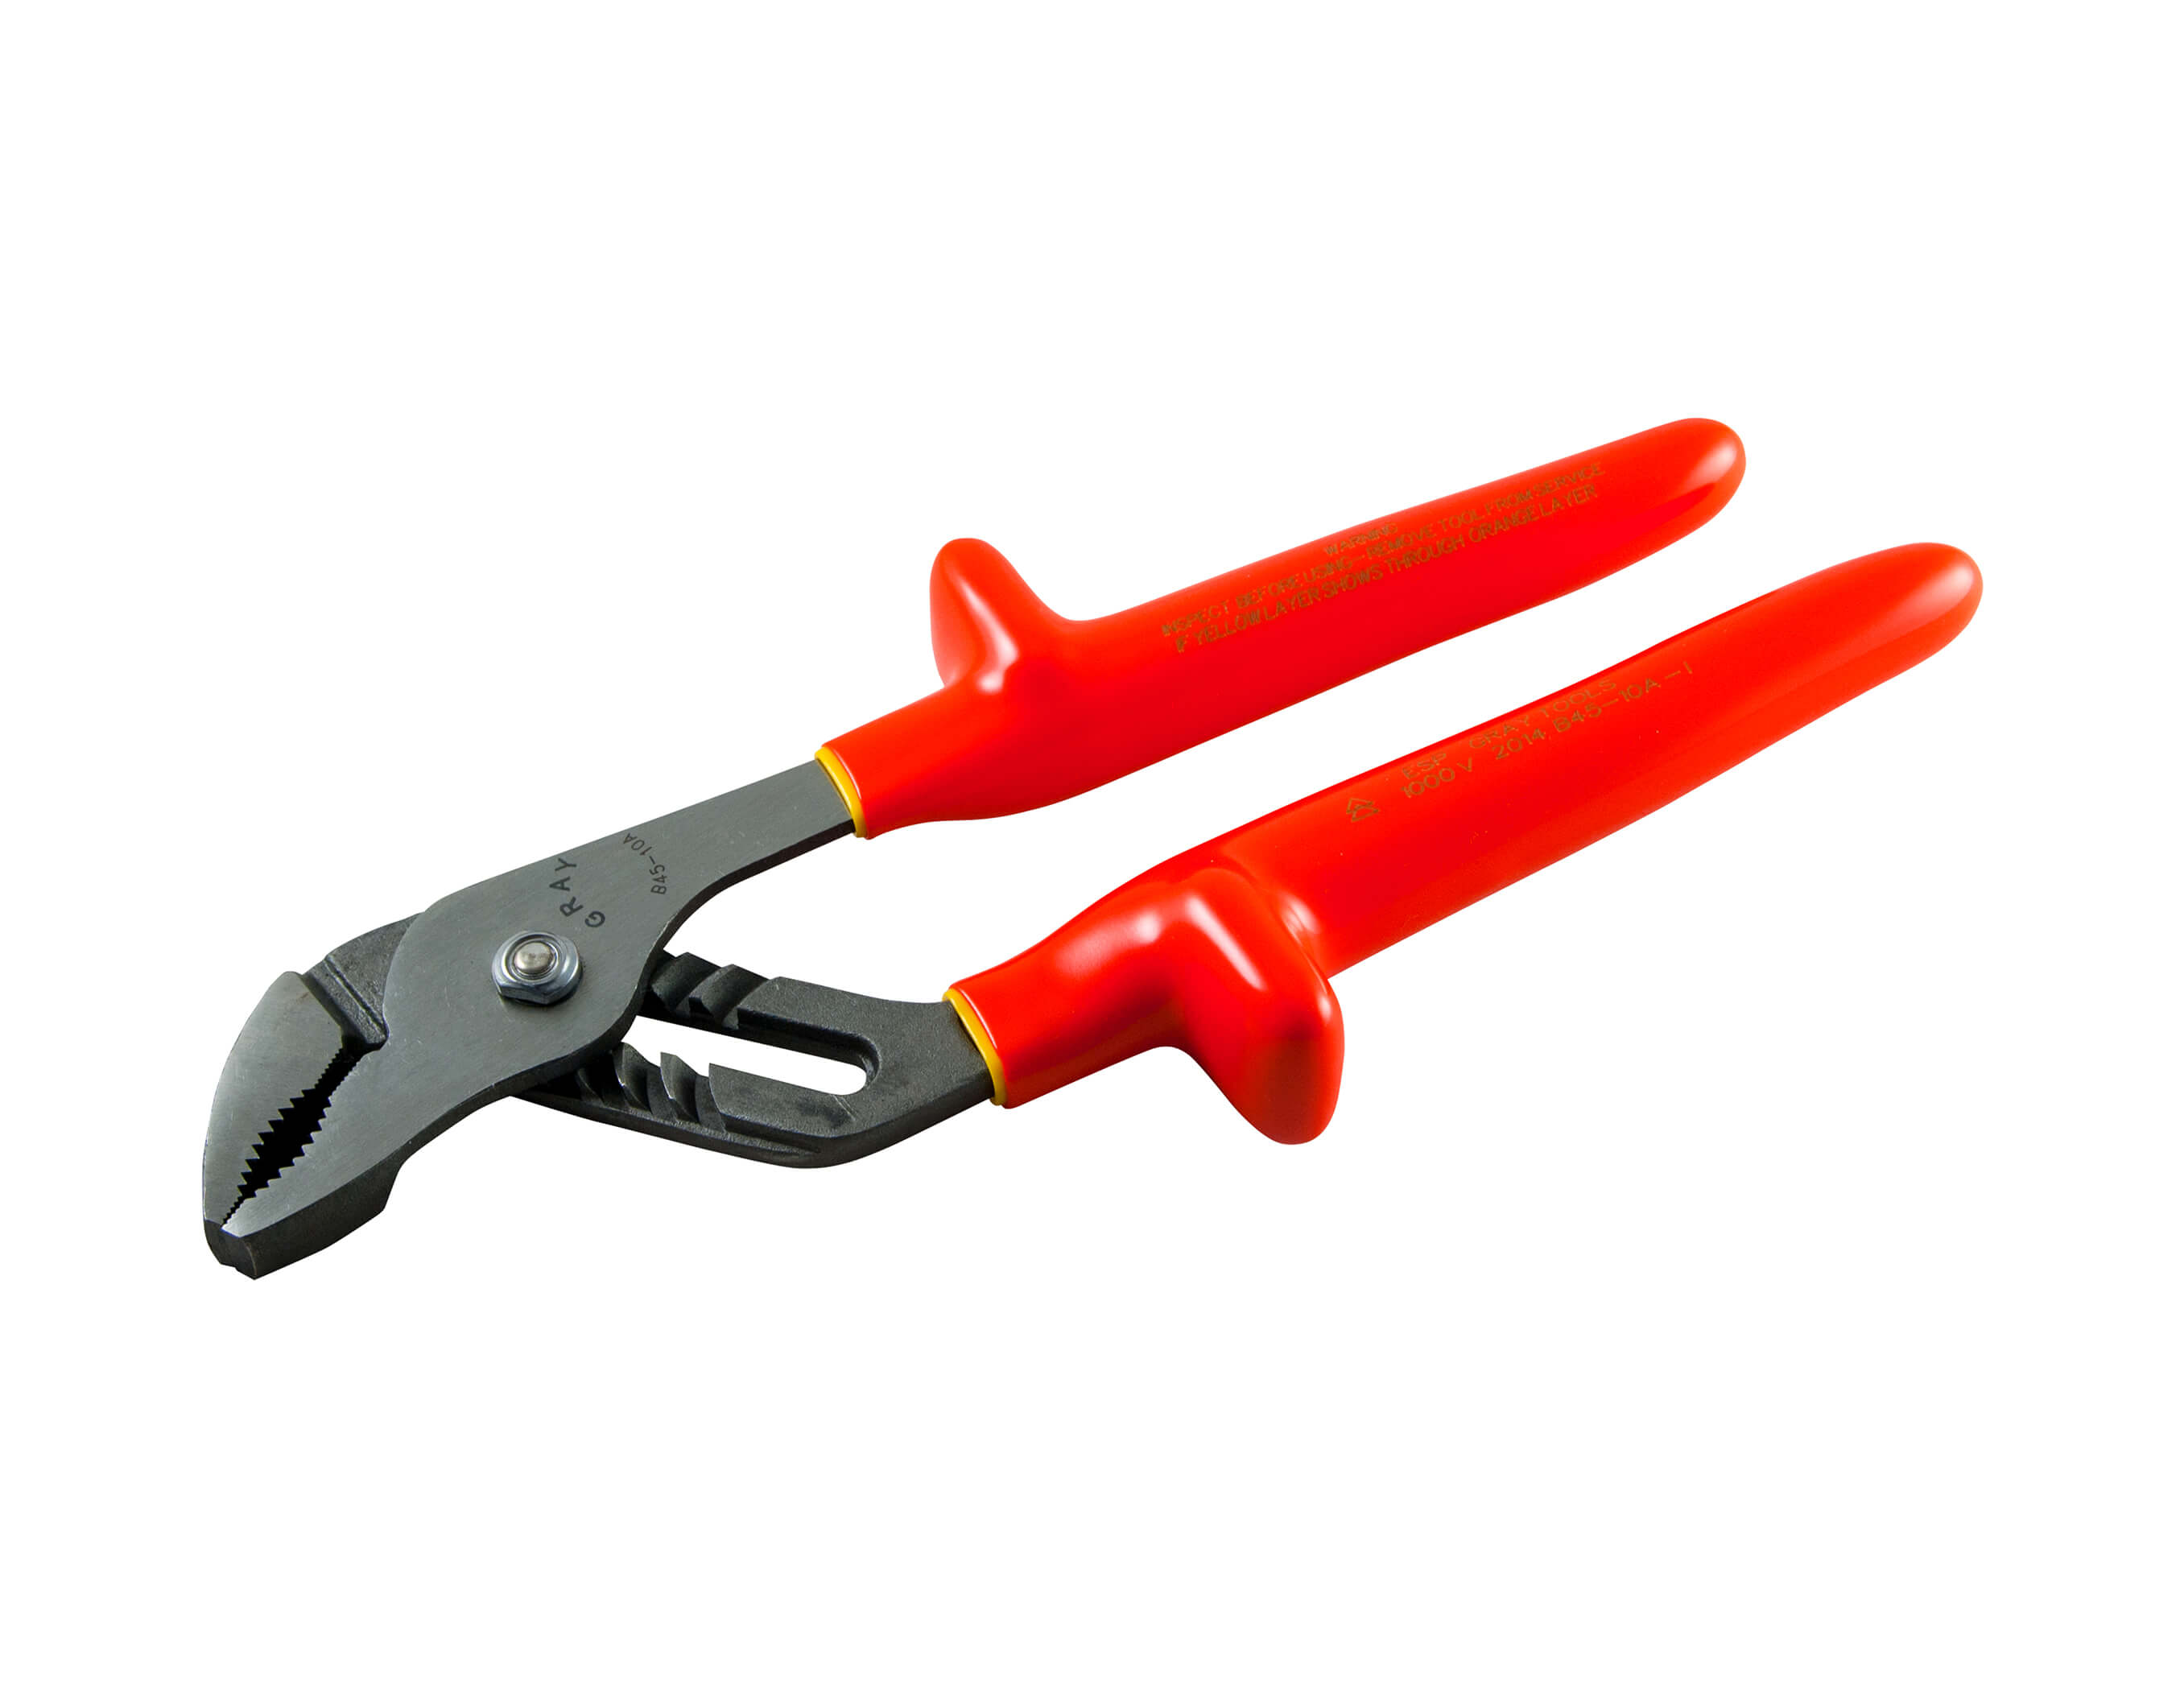 TONGUE & GROOVE SLIP JOINT INSULATED PLIERS